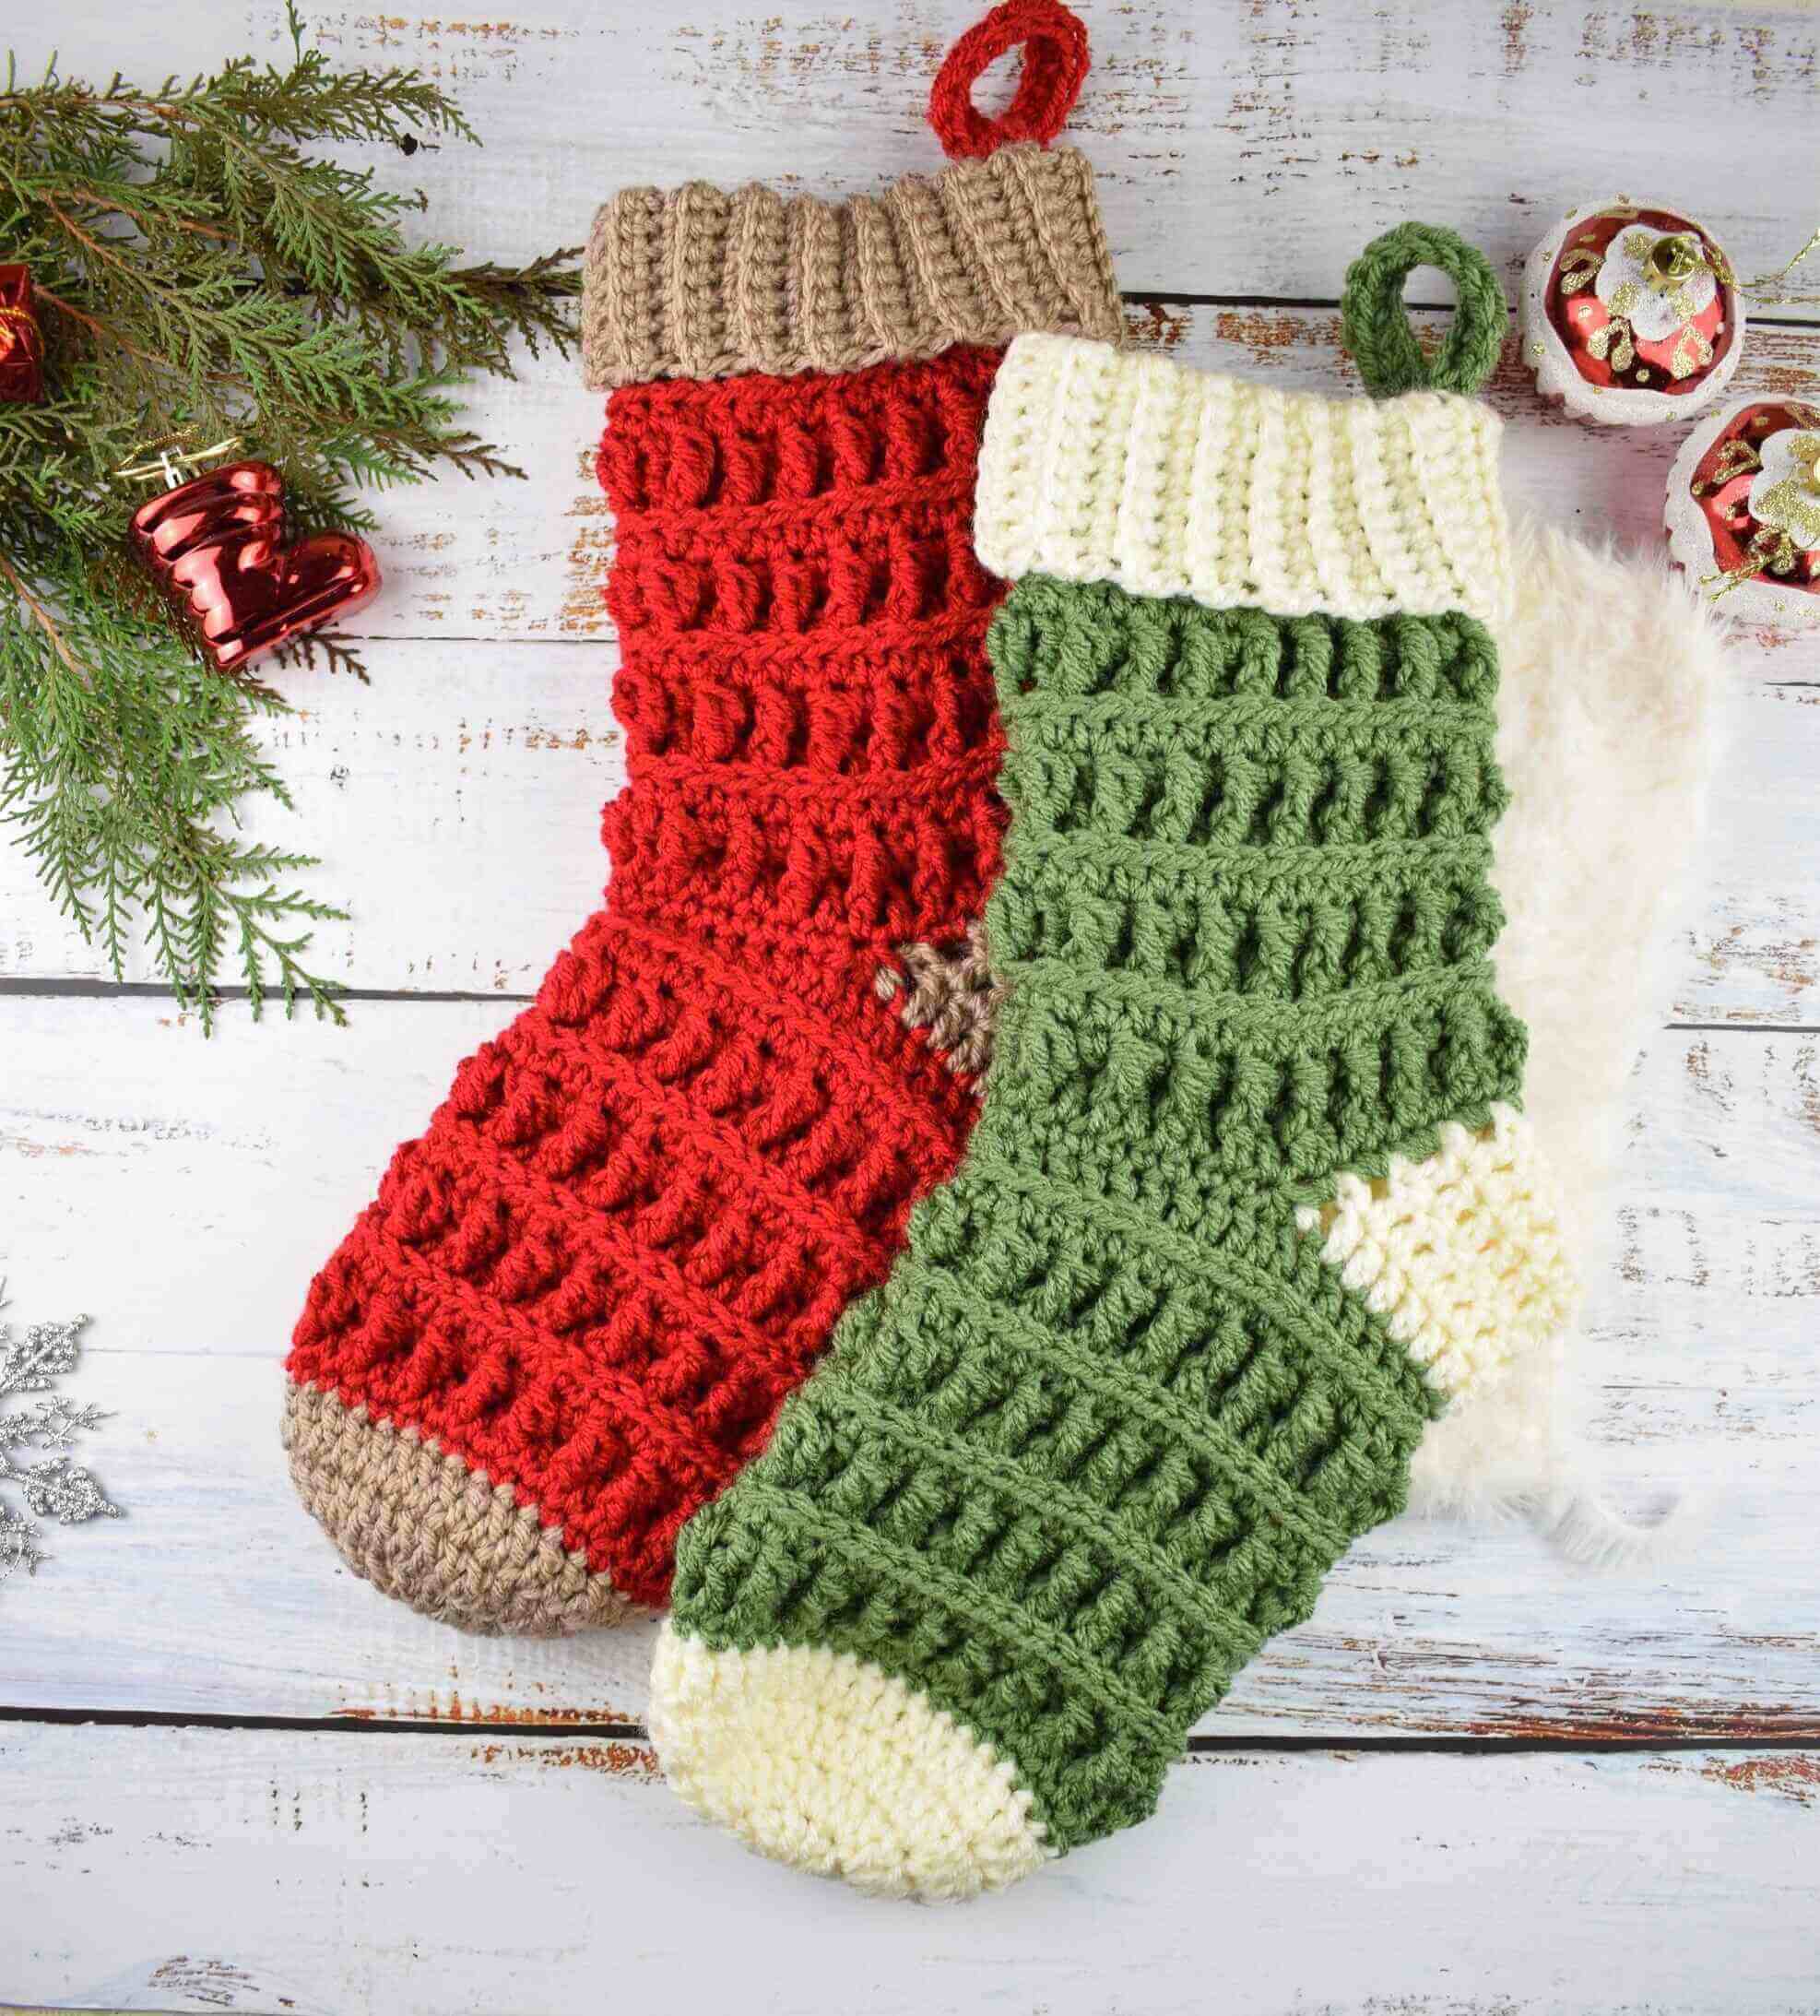 Alpine Pattern Christmas Stocking Made From CrochetCrochet Christmas Stocking Patterns